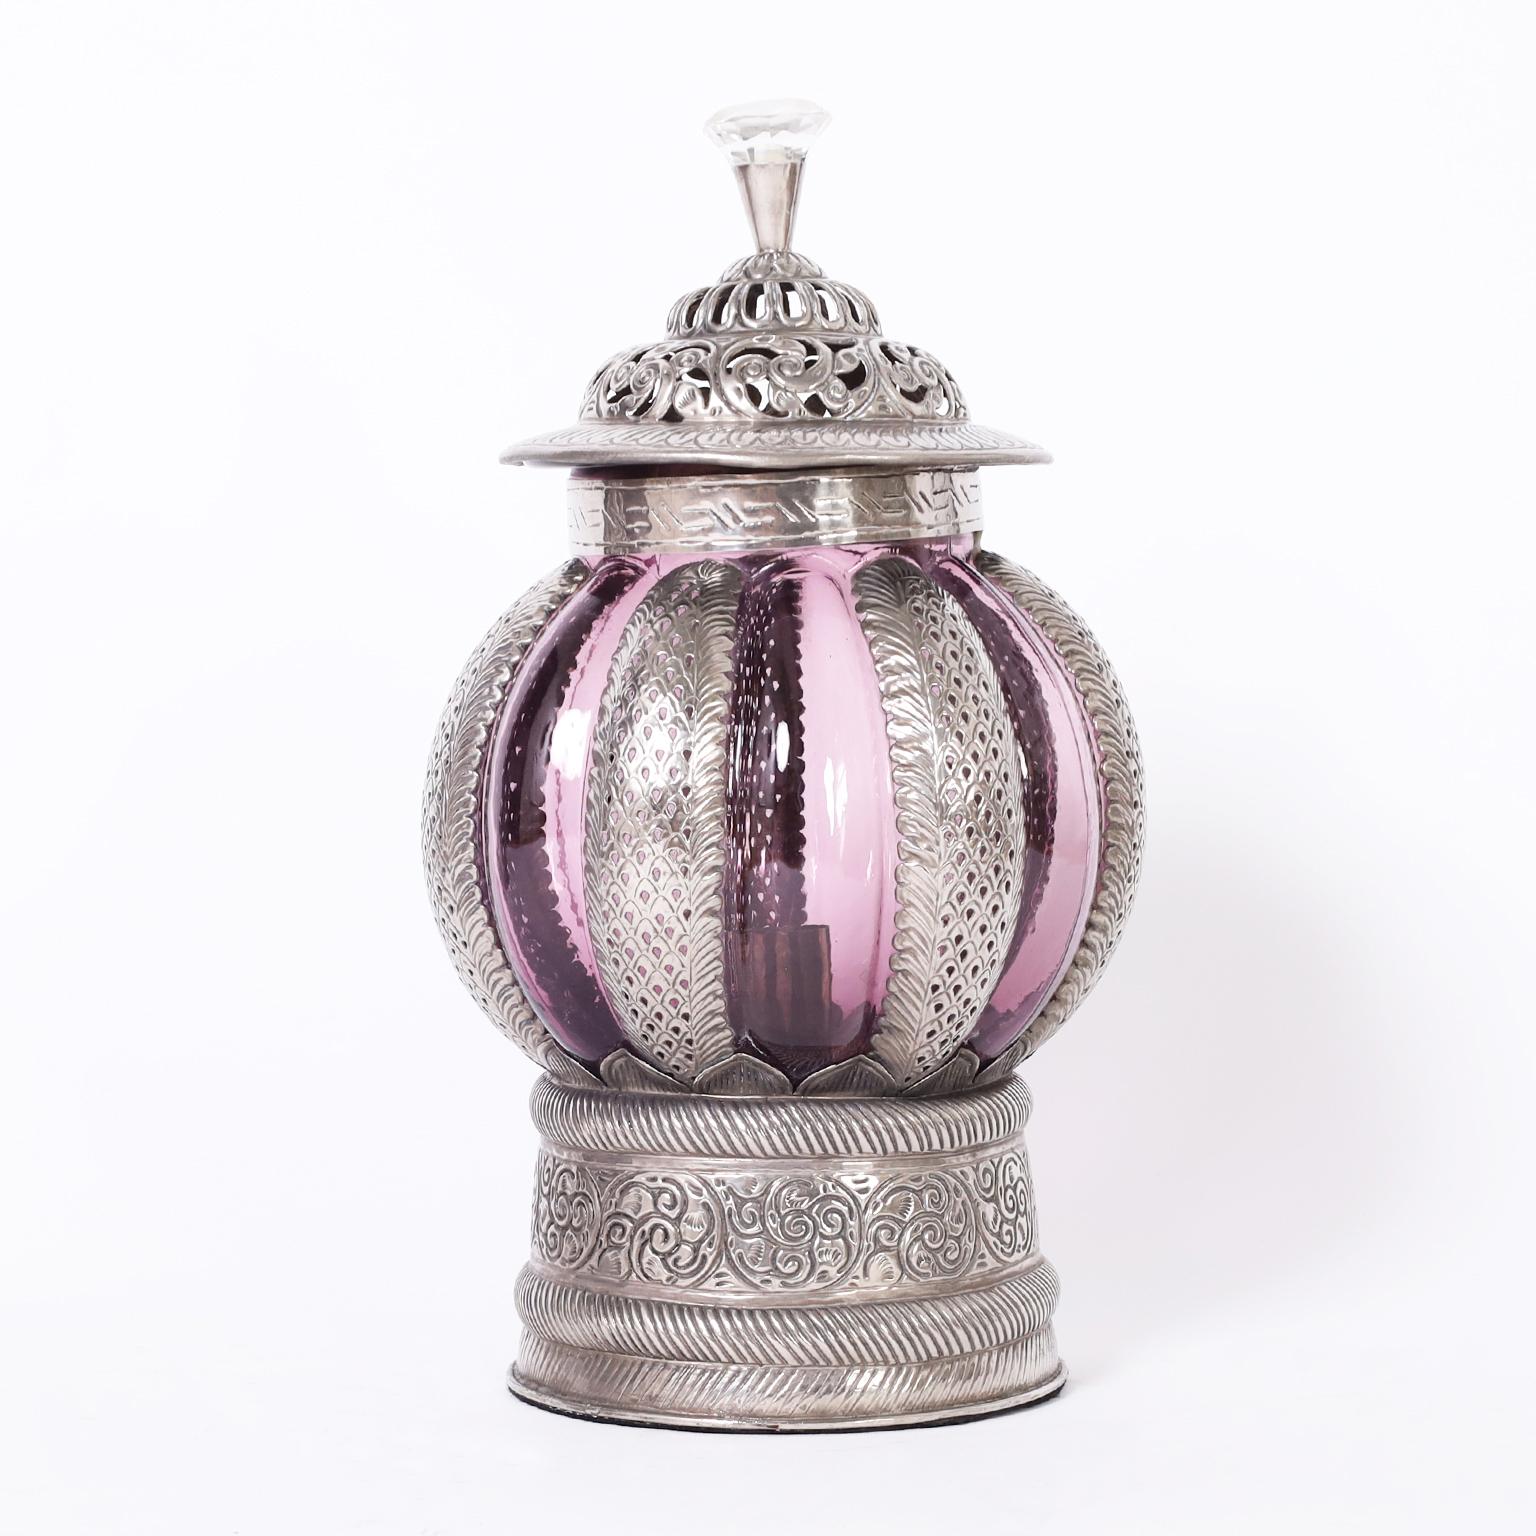 Intriguing pair of vintage Moroccan lanterns crafted in hand hammered metal work with floral designs and featuring cut glass handles and alluring hand blown amethyst glass shades.